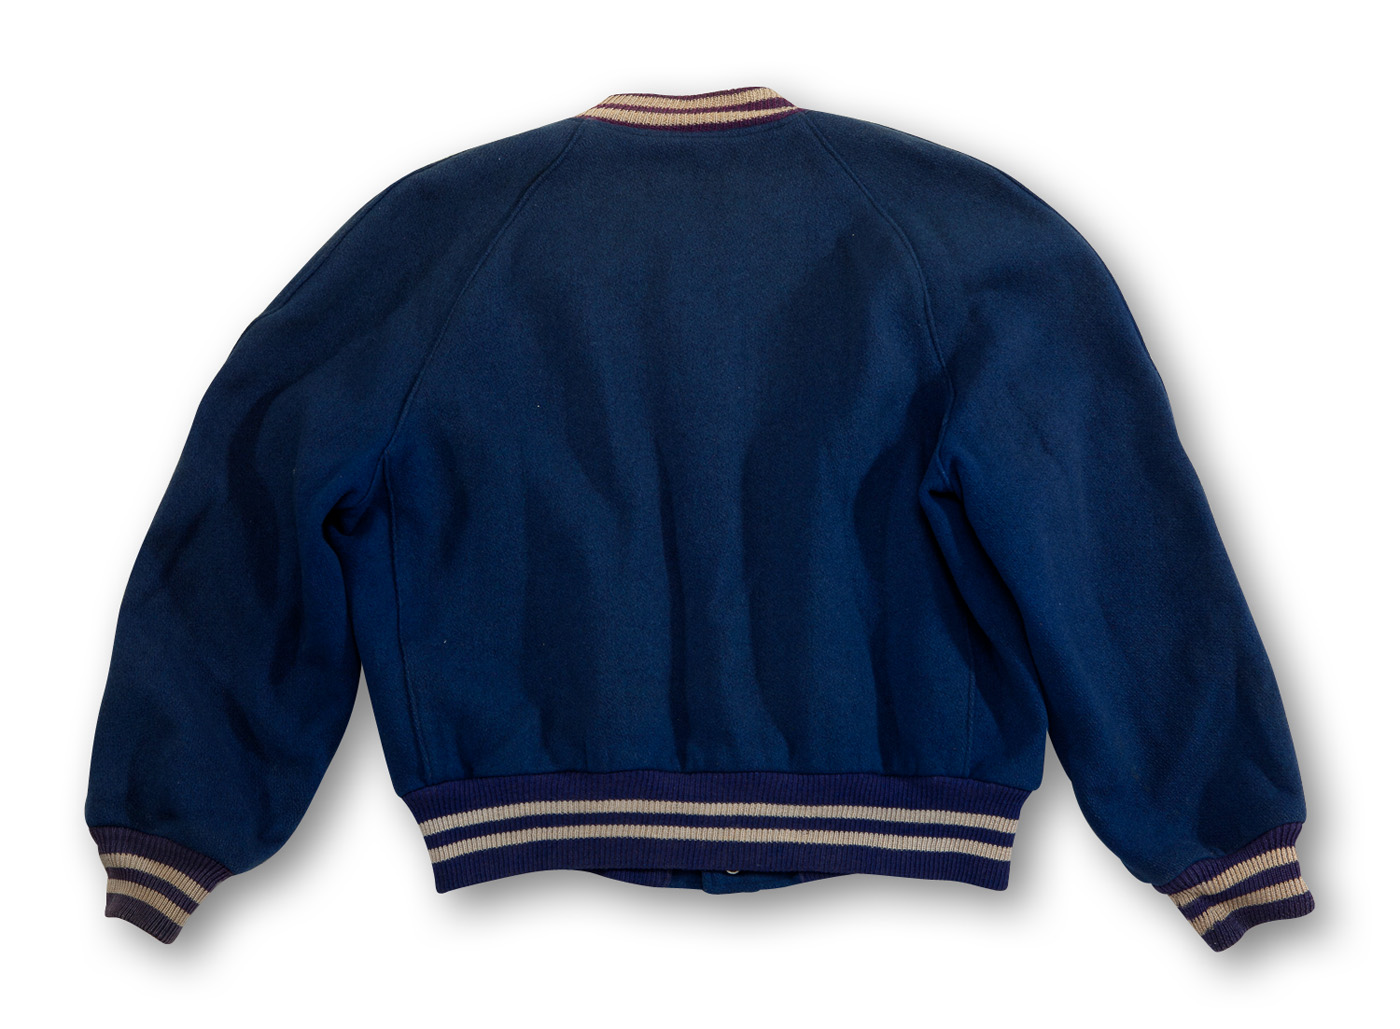 Lot Detail - 1950'S DODGERS GAME WORN TEAM JACKET ATTRIBUTED TO JACKIE ...